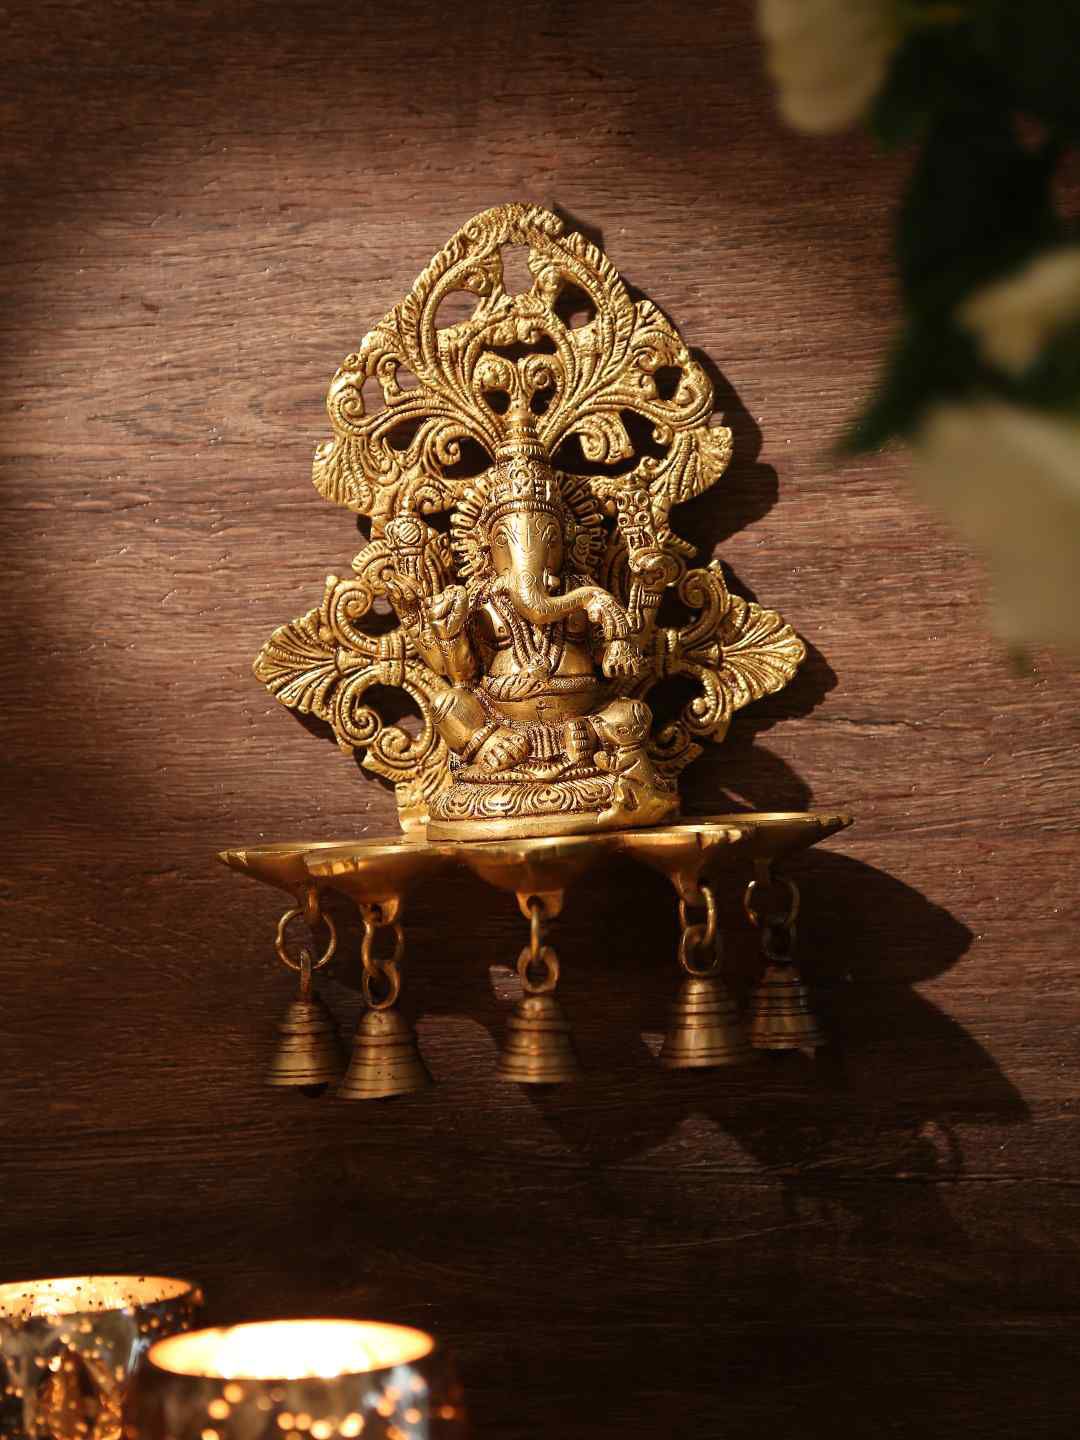 Amoliconcepts Gold-Toned Solid Brass Ganesha Lamp With Bells Price in India